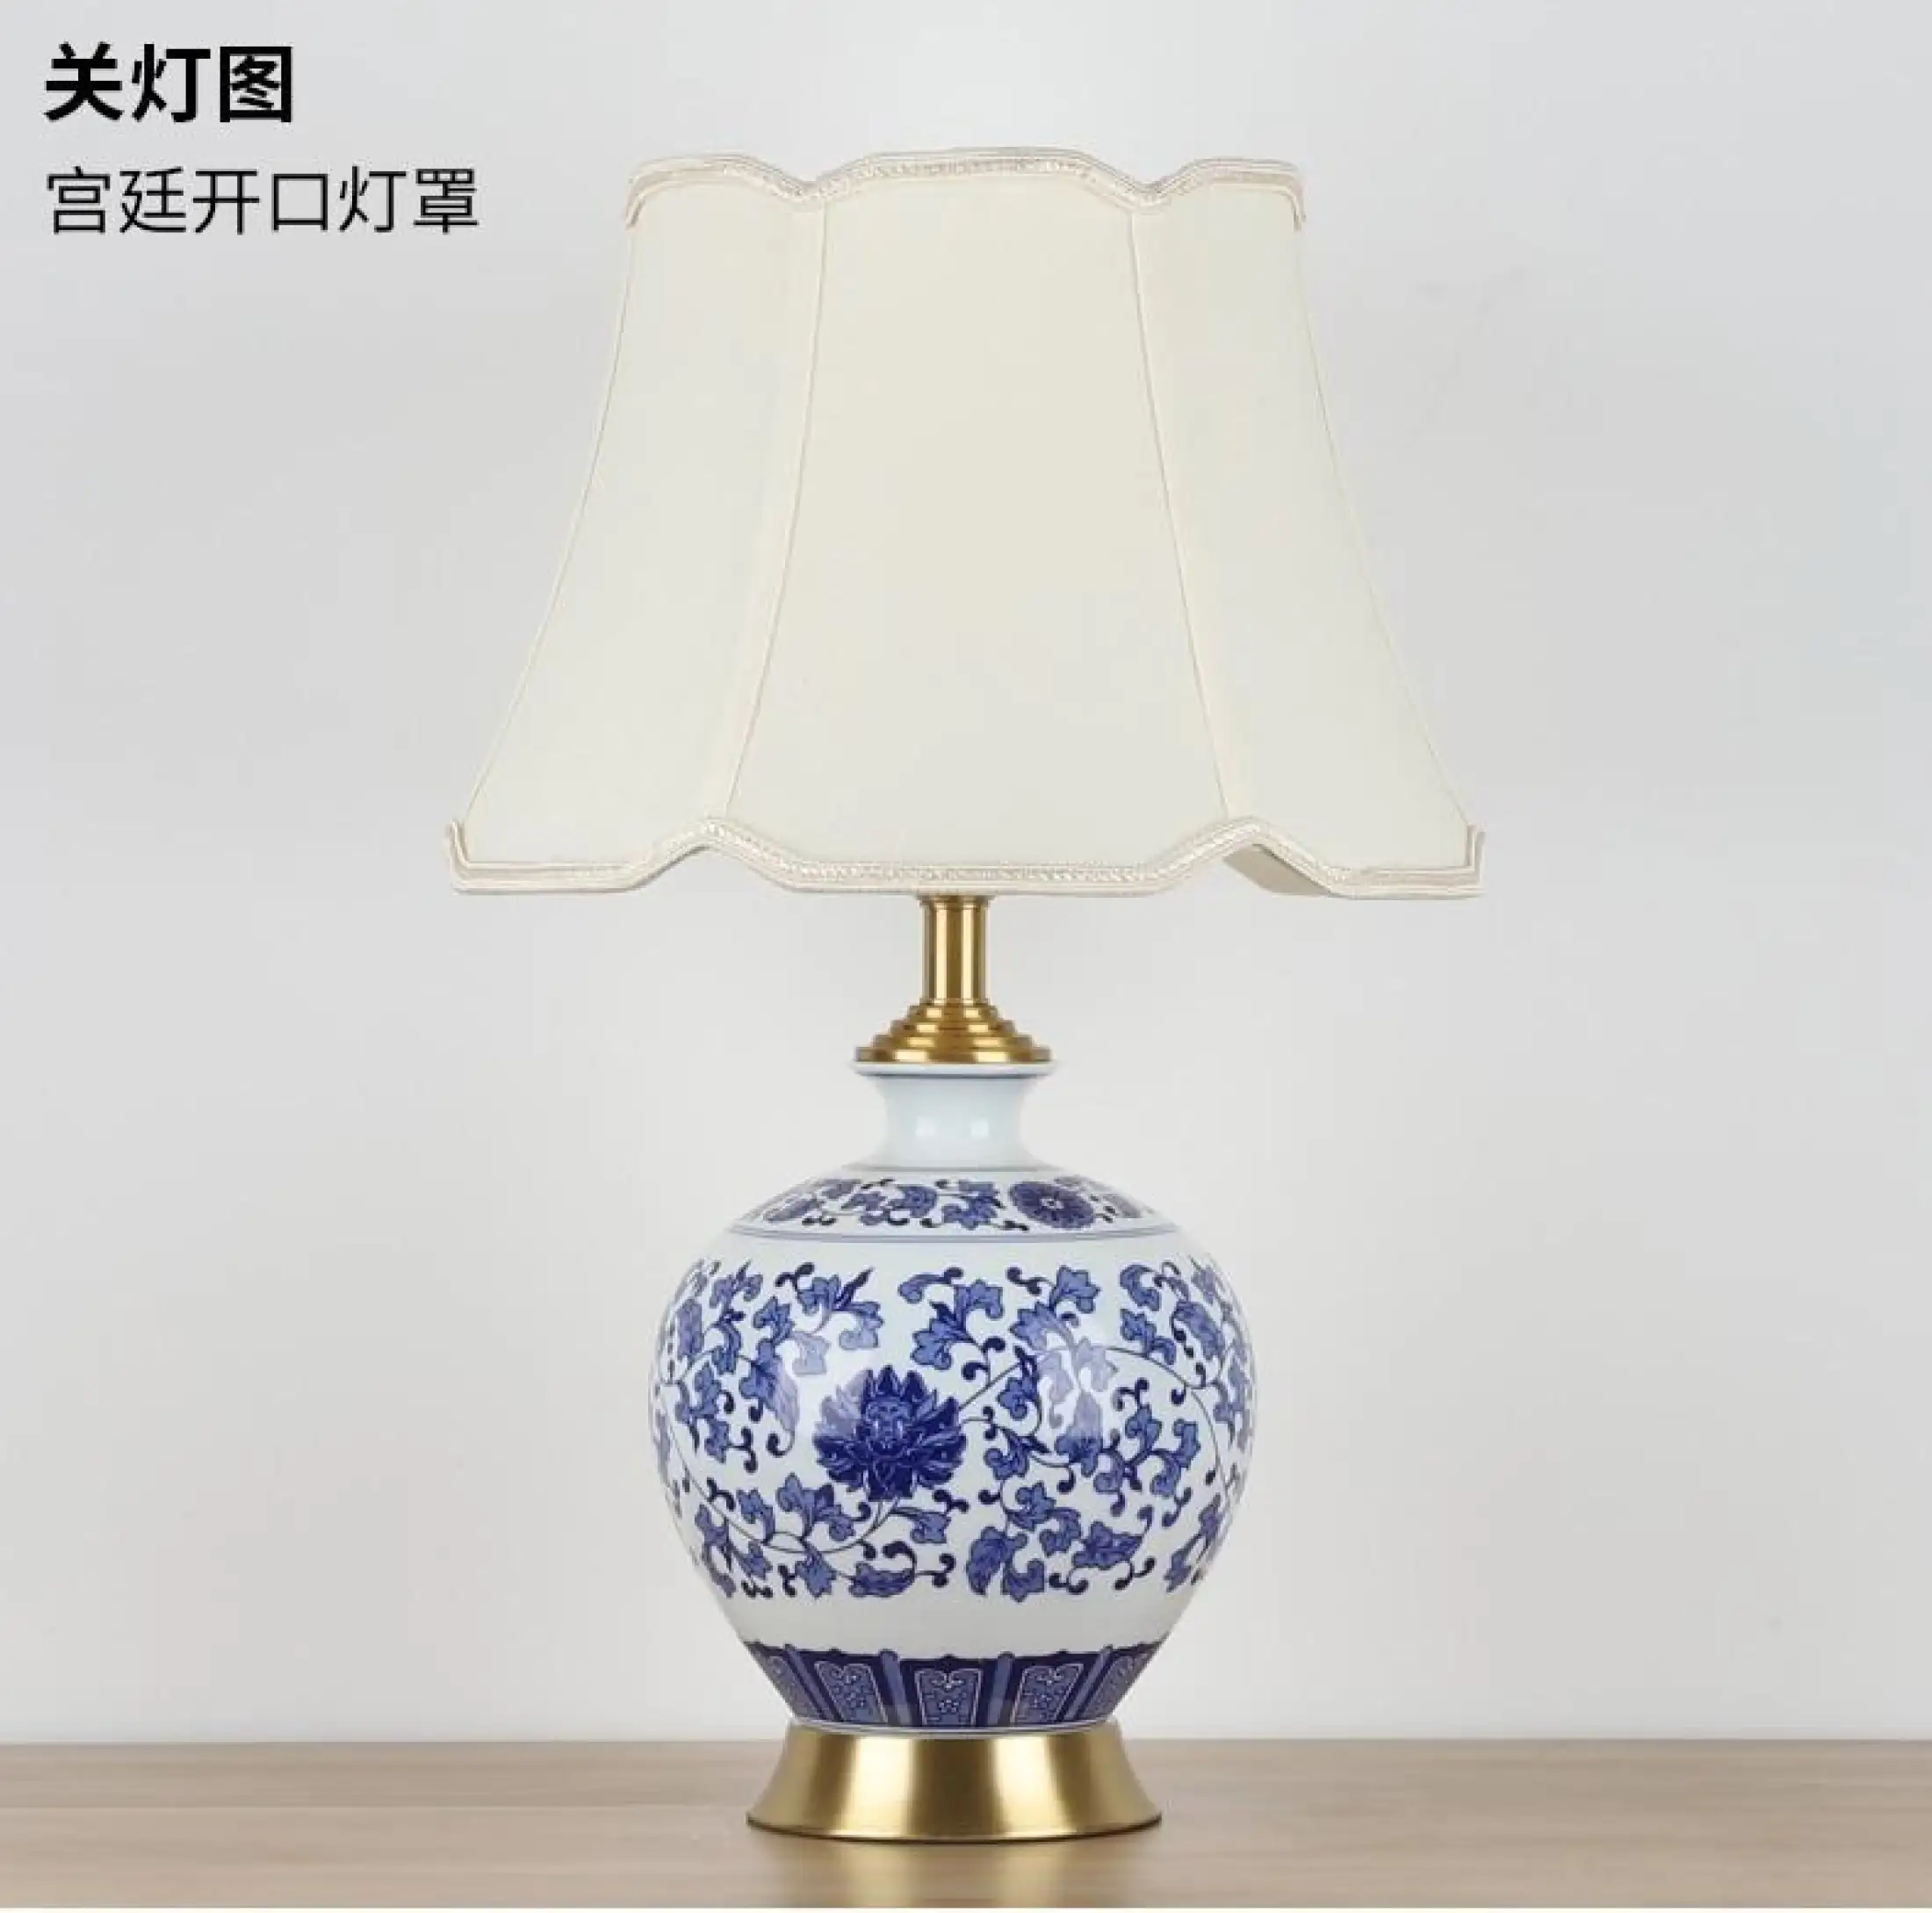 Loco Light Ceramic Table Lamp Chinese, Chinese Table Lamps Australian